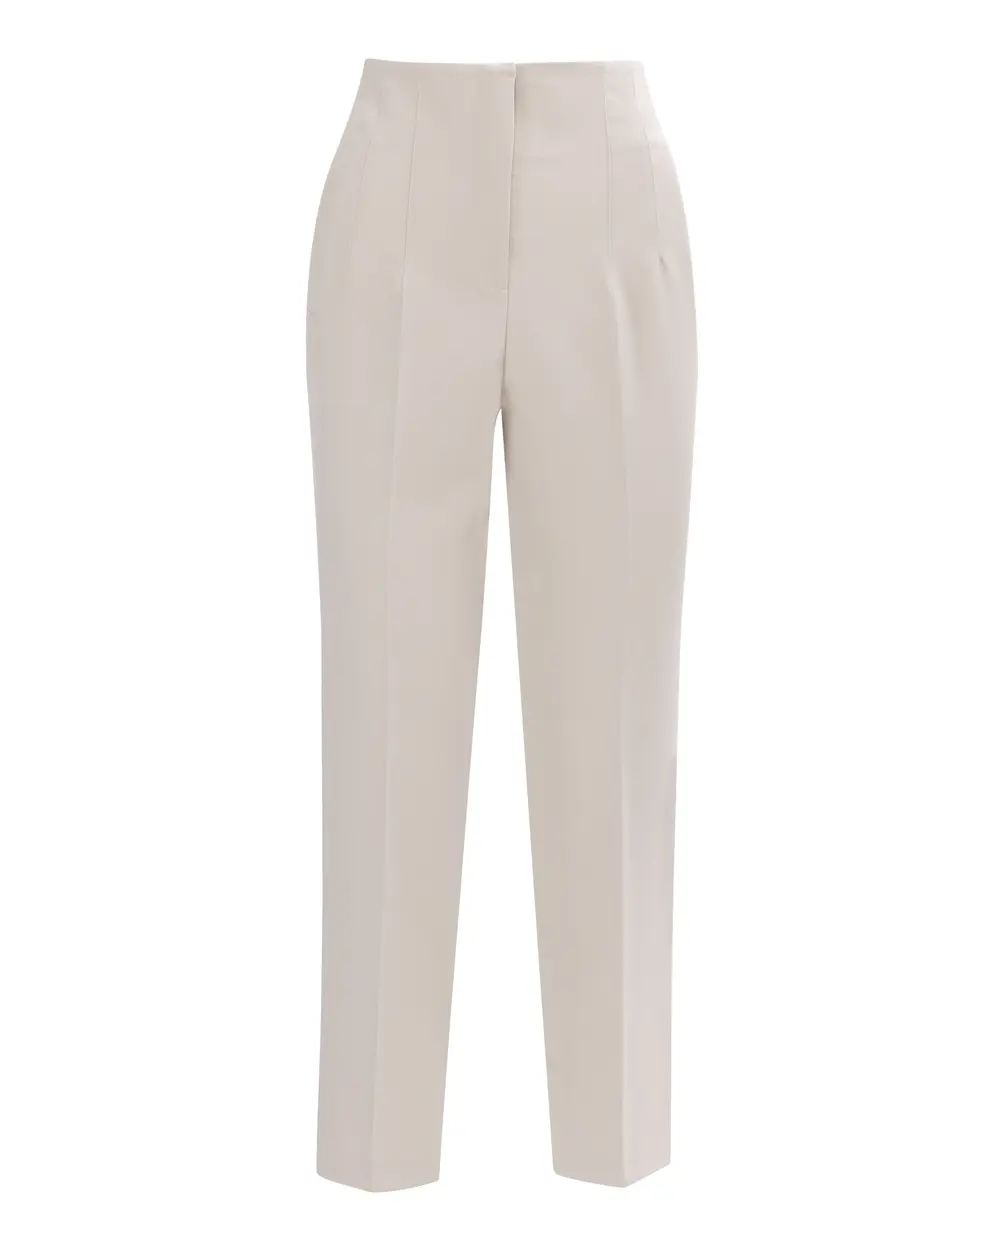 Ankle Length Trousers with Zipper Detail